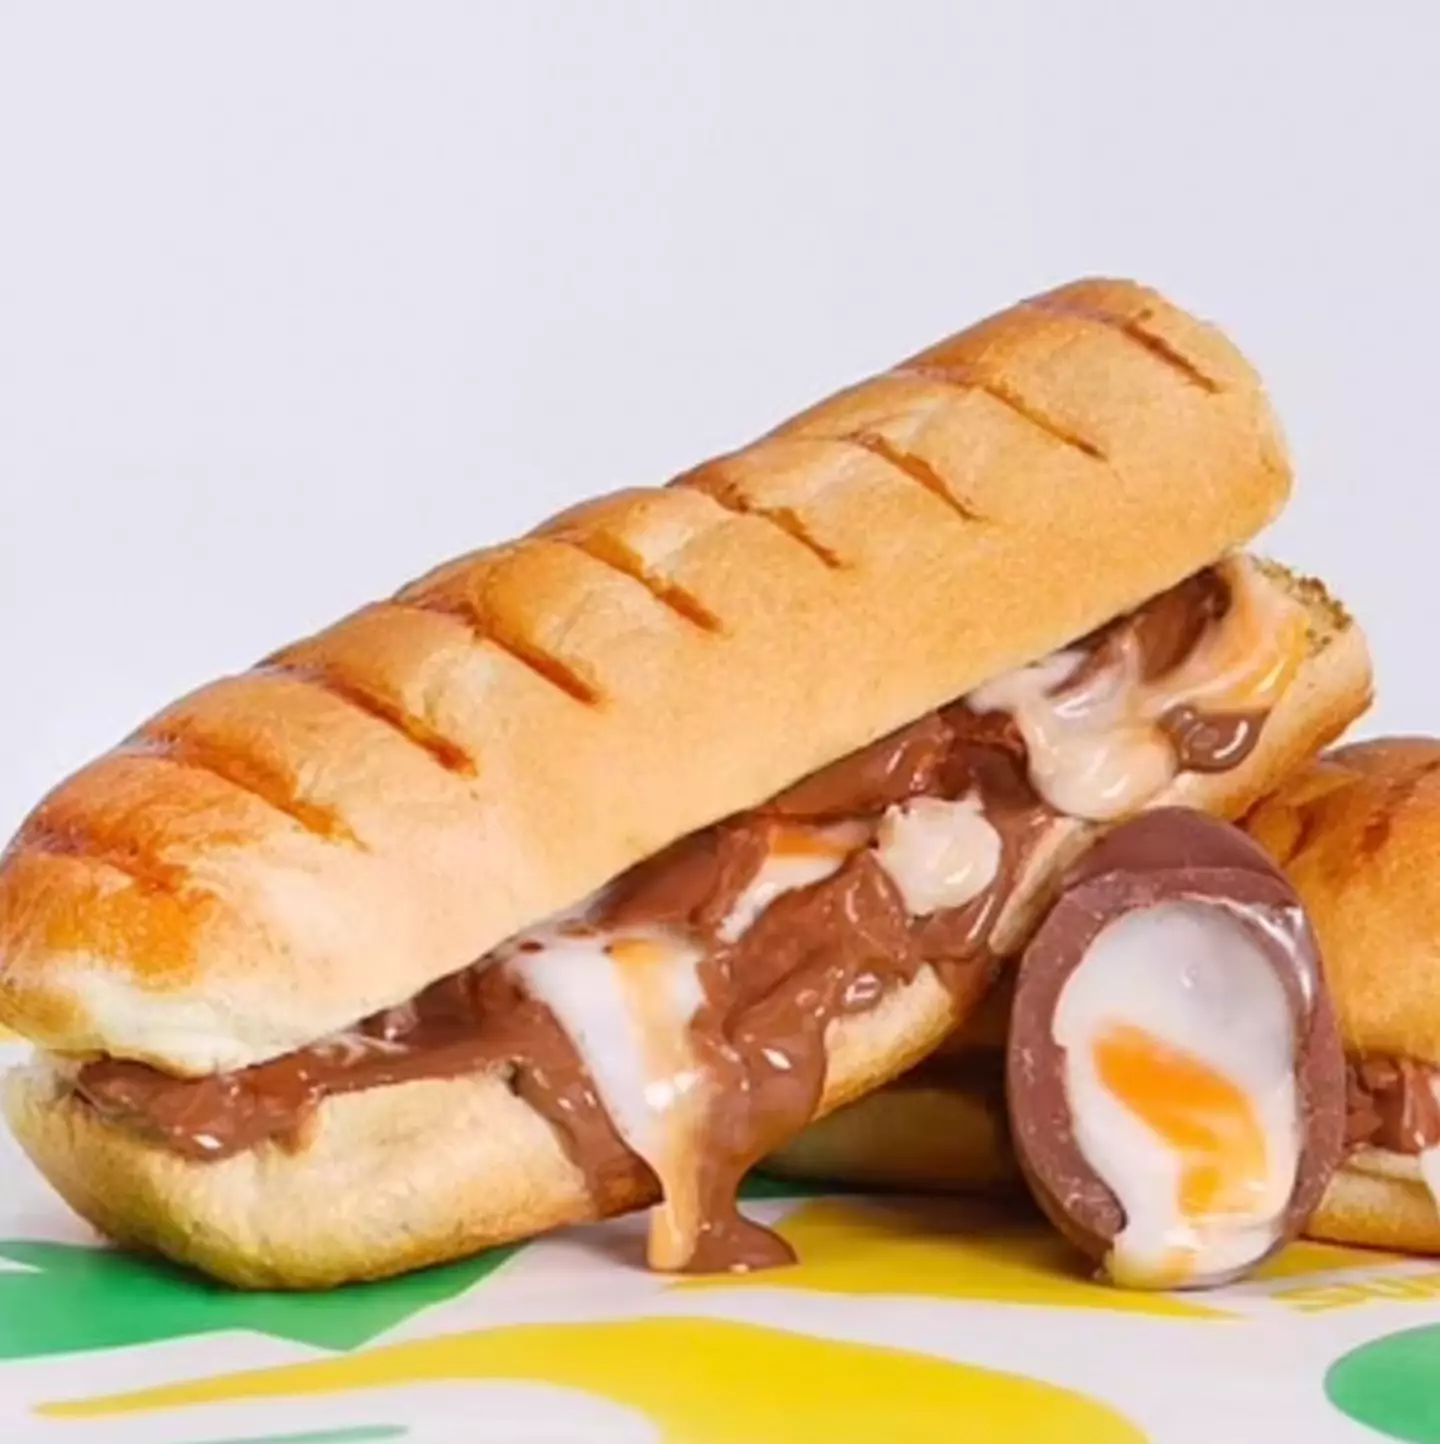 The Creme Egg Subways will be available for free on Good Friday at four locations.